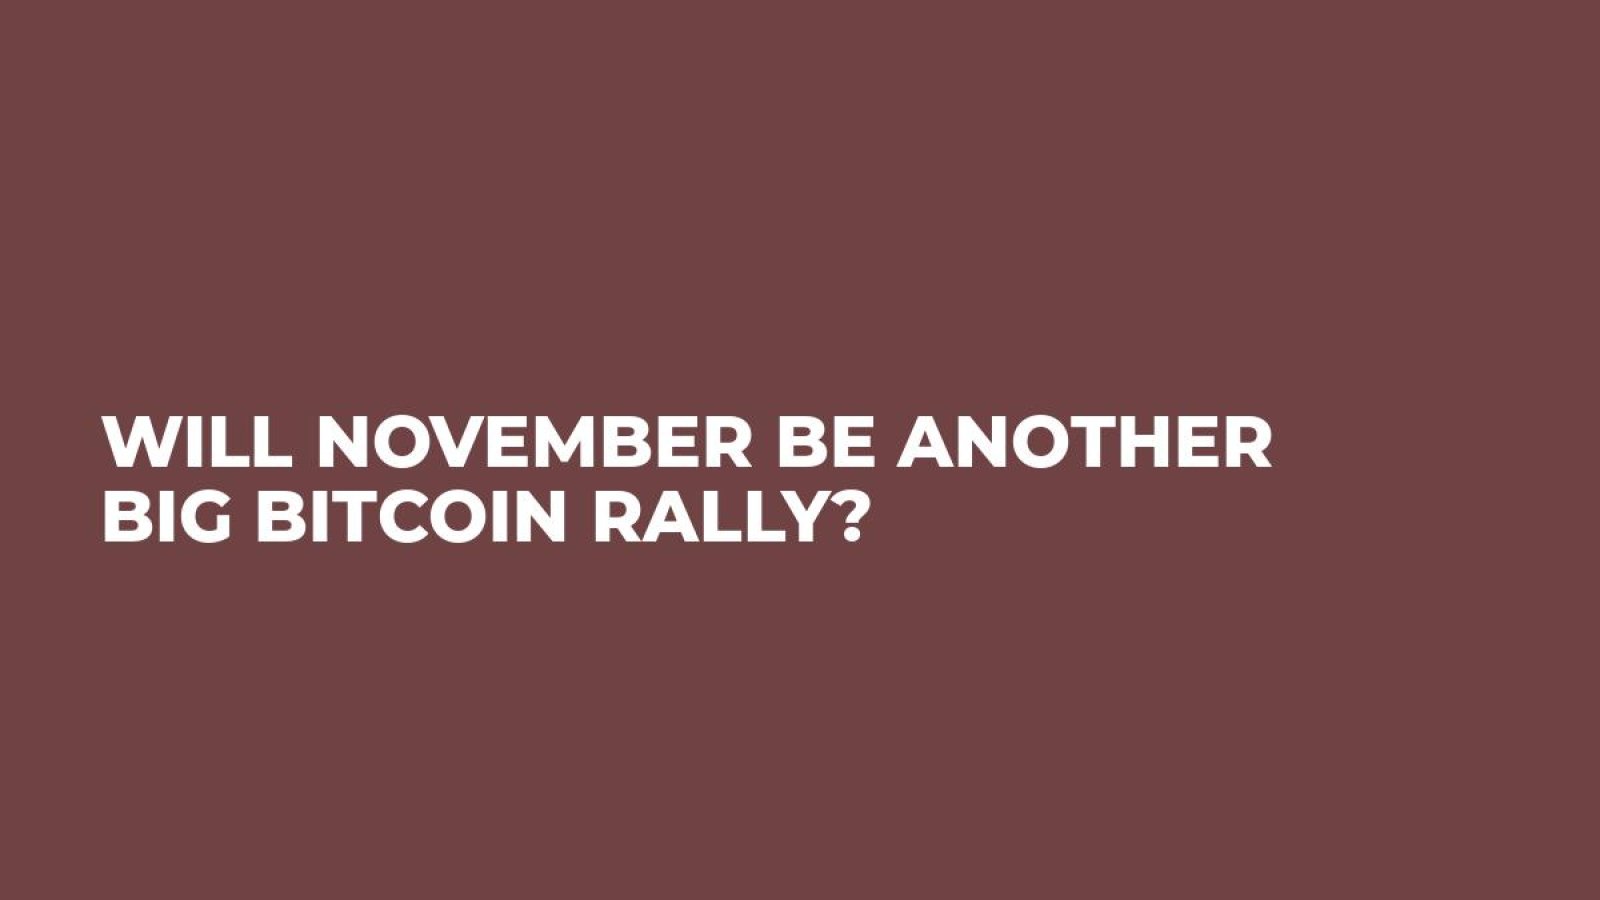 Will November Be Another Big Bitcoin Rally?